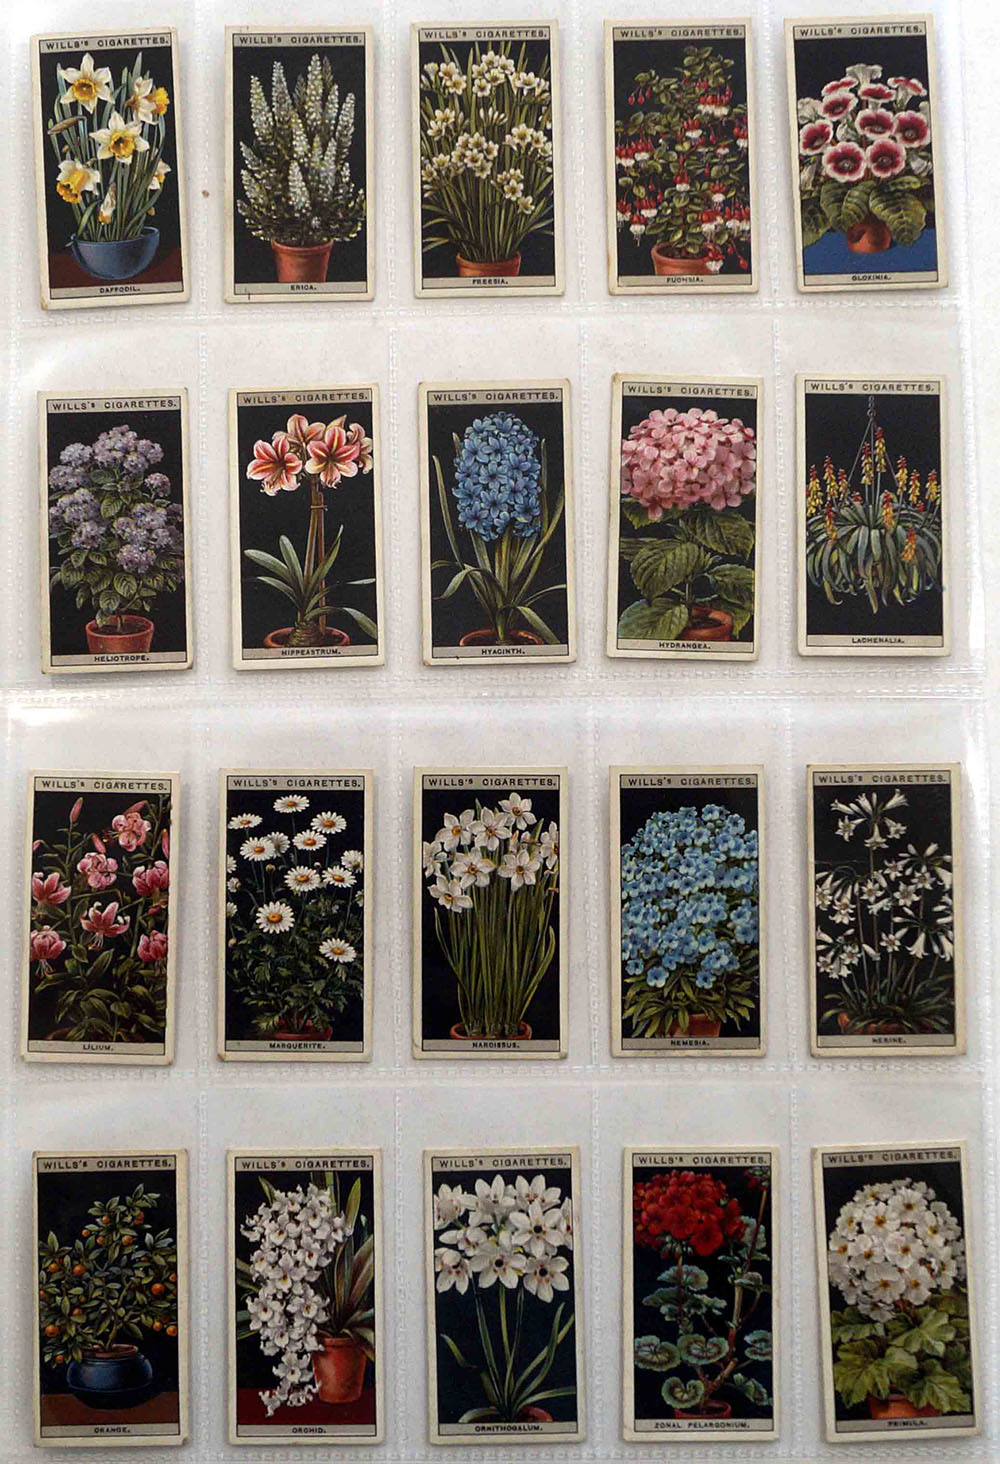 Flower Culture in Pots: Full Set of 50 Cigarette Cards (1925) art by Natural History (Wildlife) at The Illustration Art Gallery